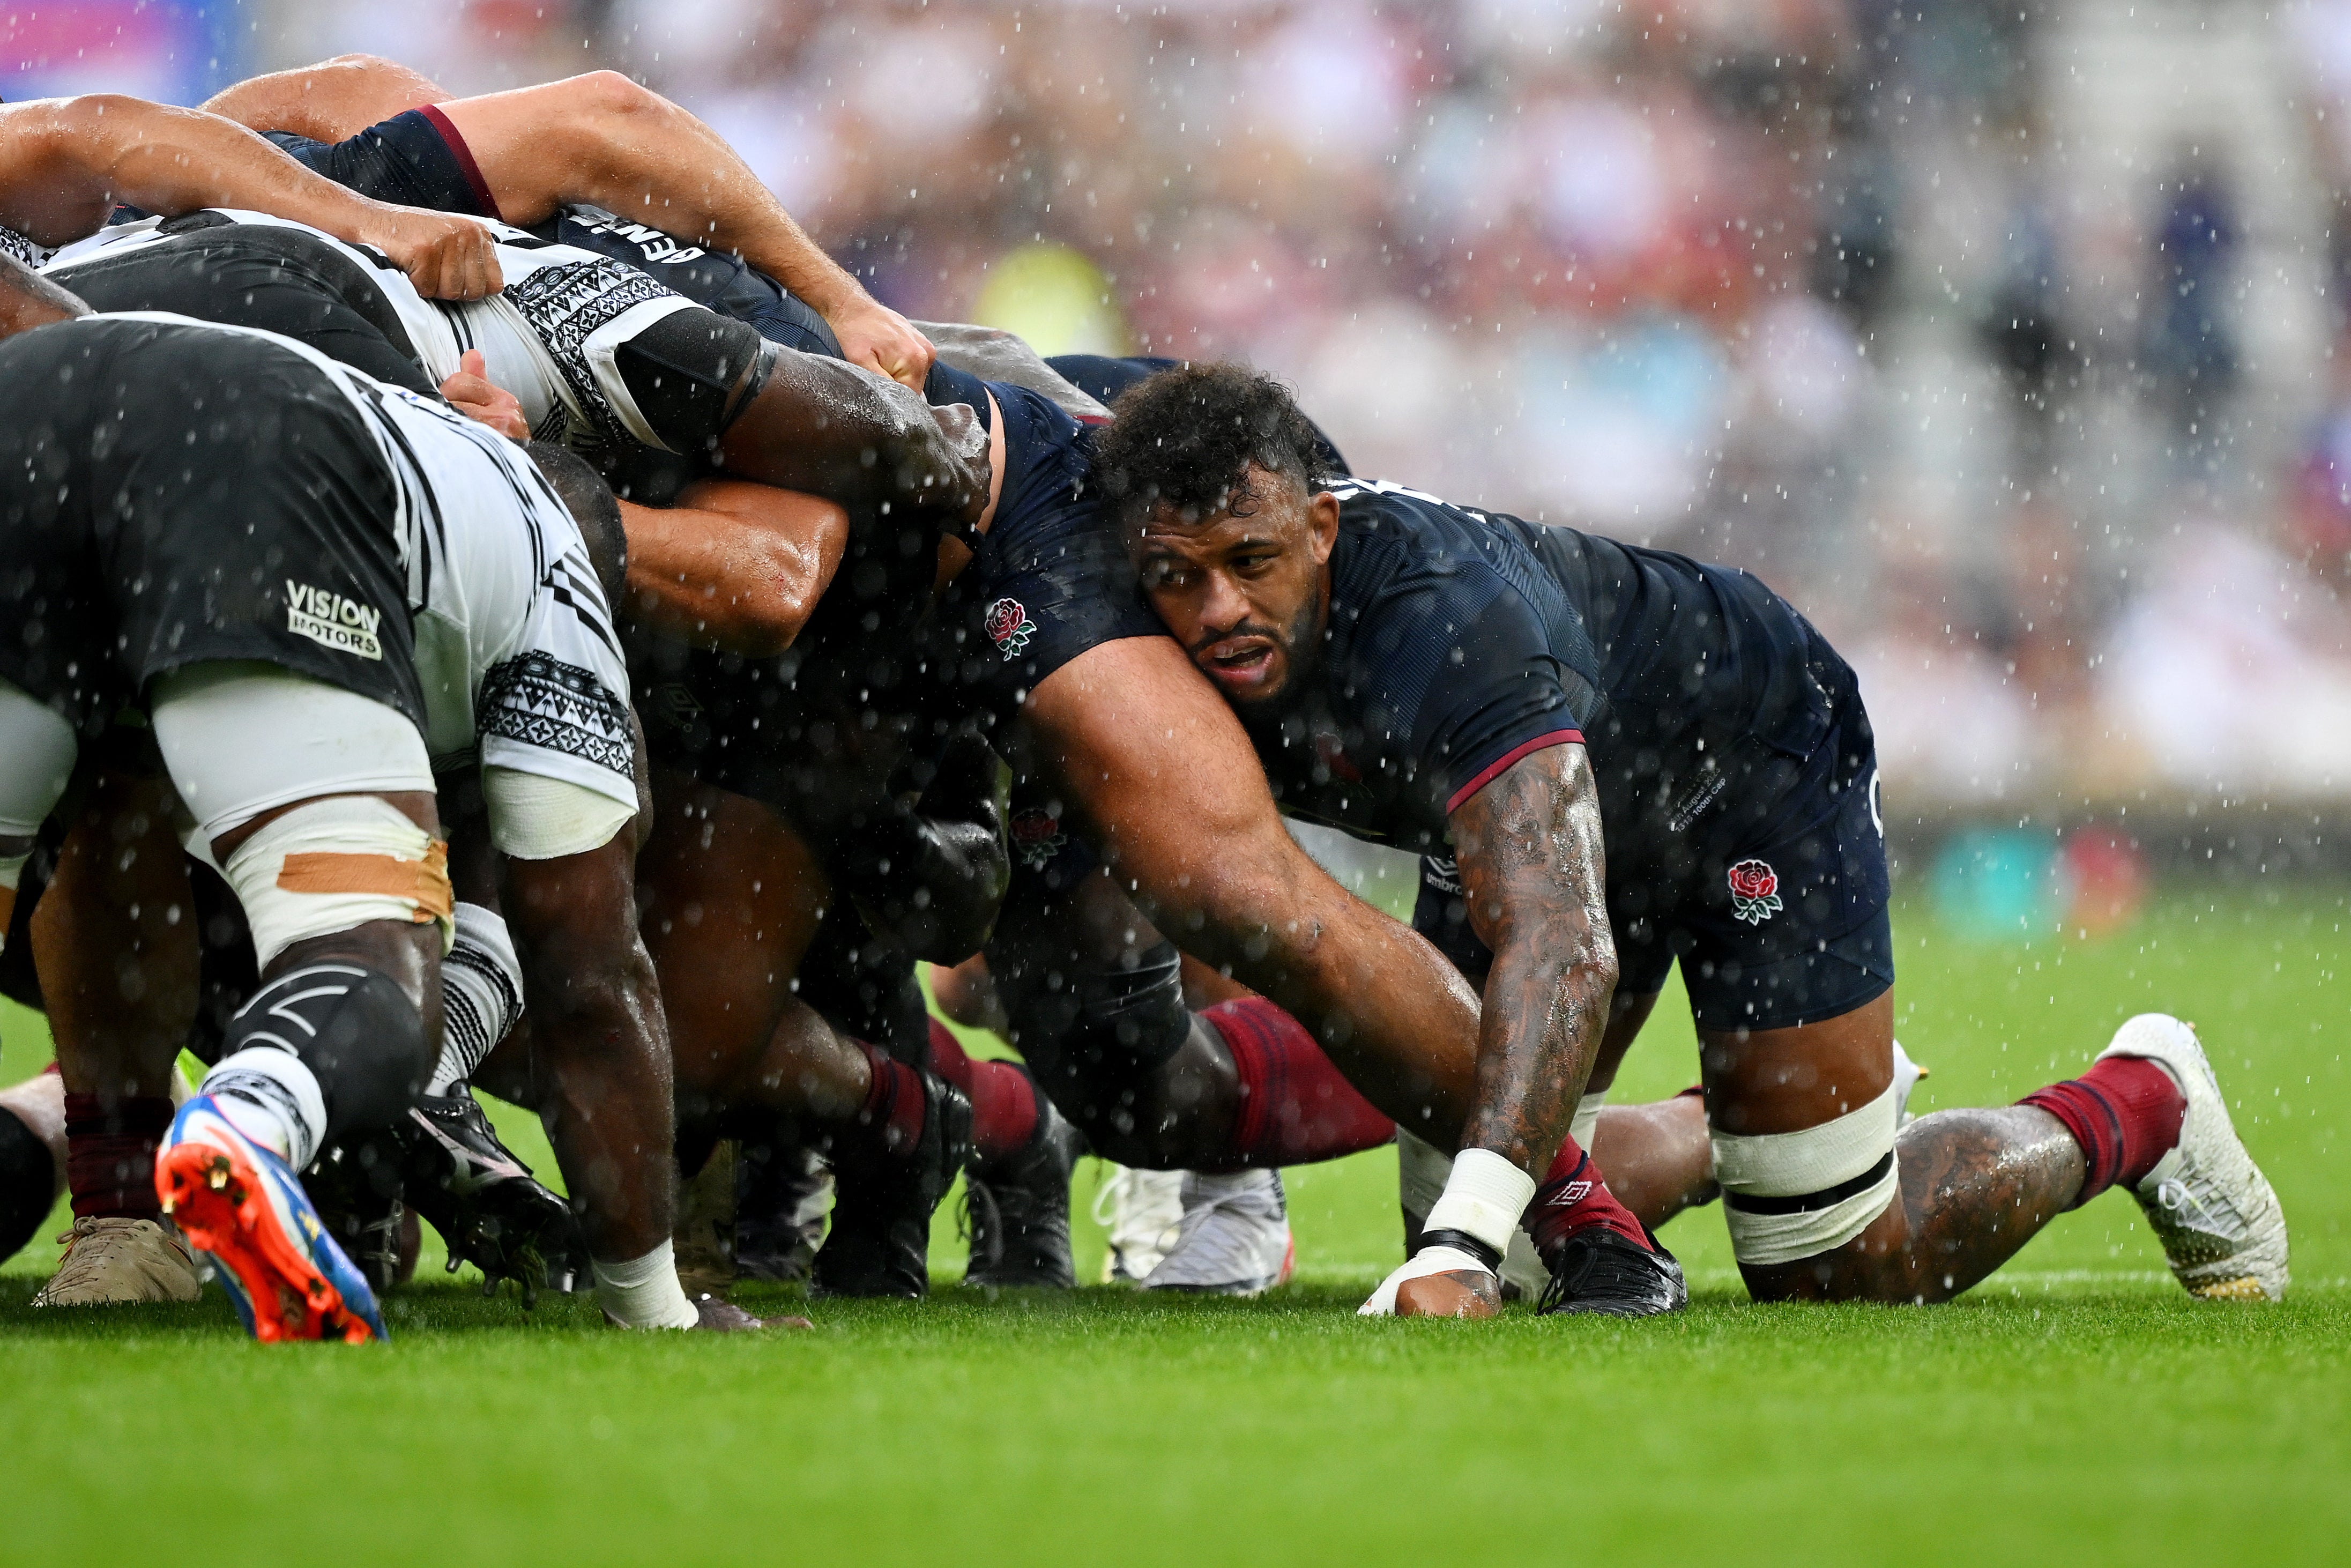 The scrum should be an intriguing battleground as England vie with Fiji for a last eight place